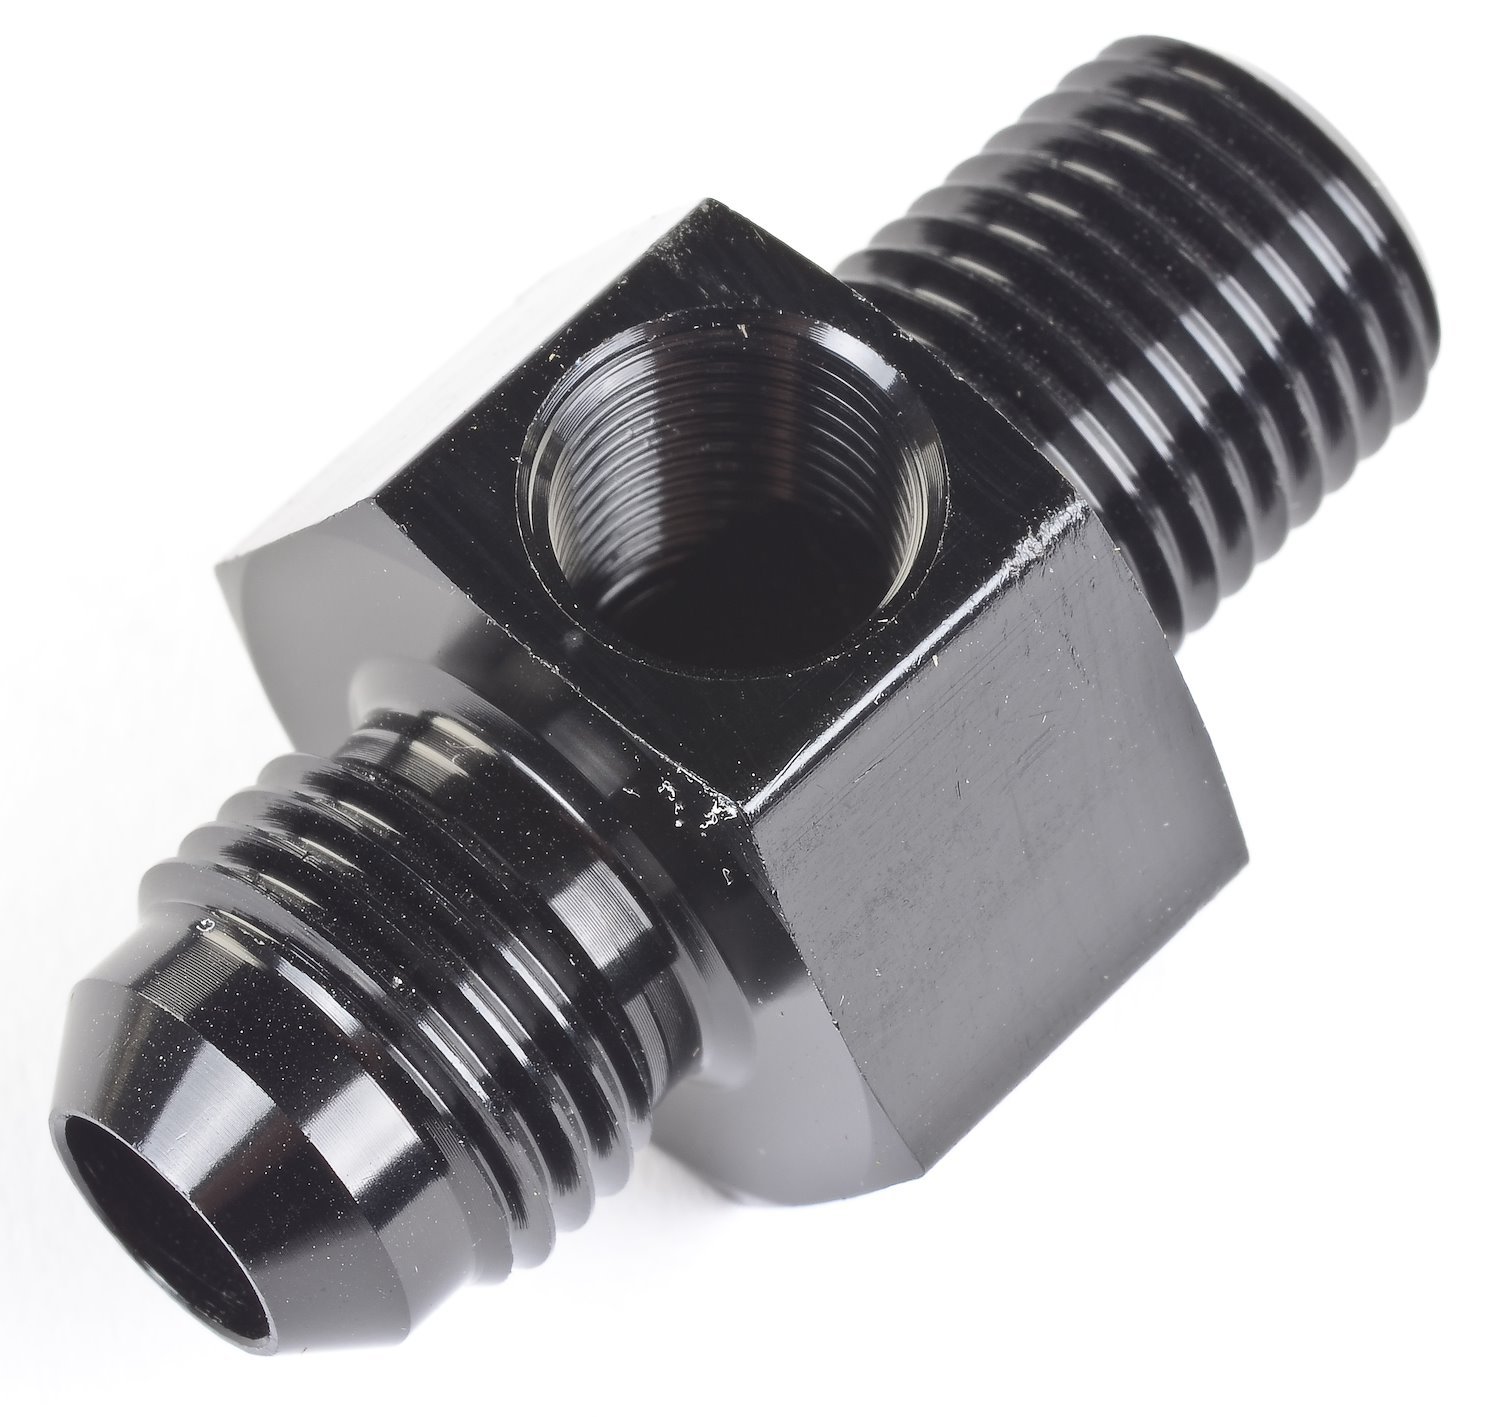 Fuel Pressure Adapter Fitting -6AN Male to 1/4" NPT